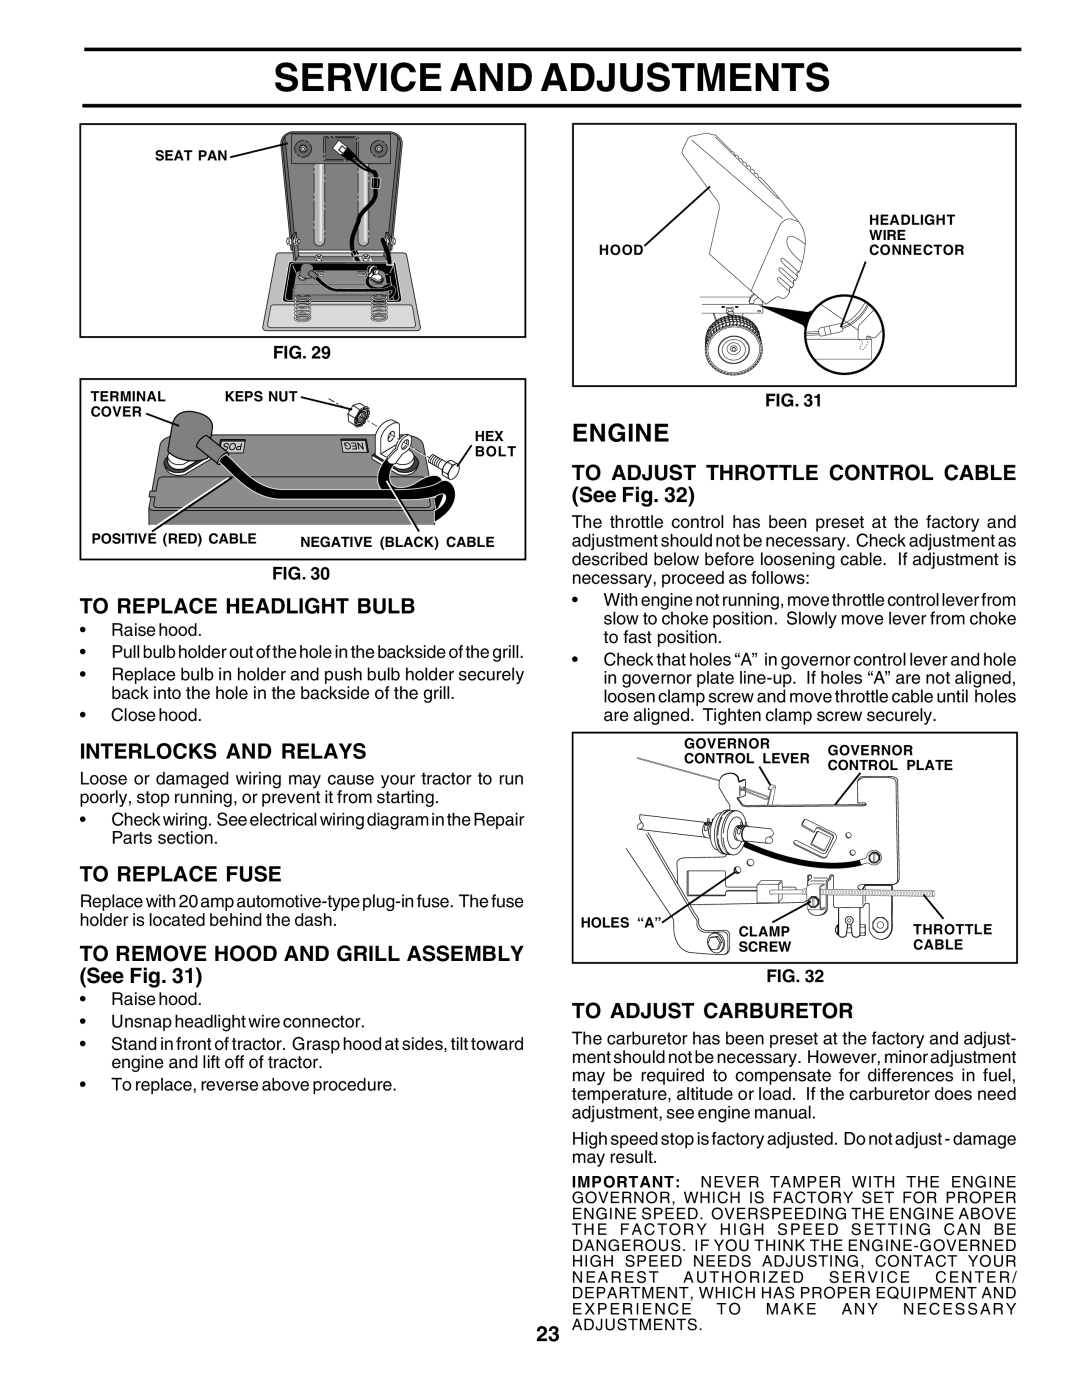 Poulan 183046 owner manual To Replace Headlight Bulb, Interlocks and Relays, To Replace Fuse, To Adjust Carburetor 